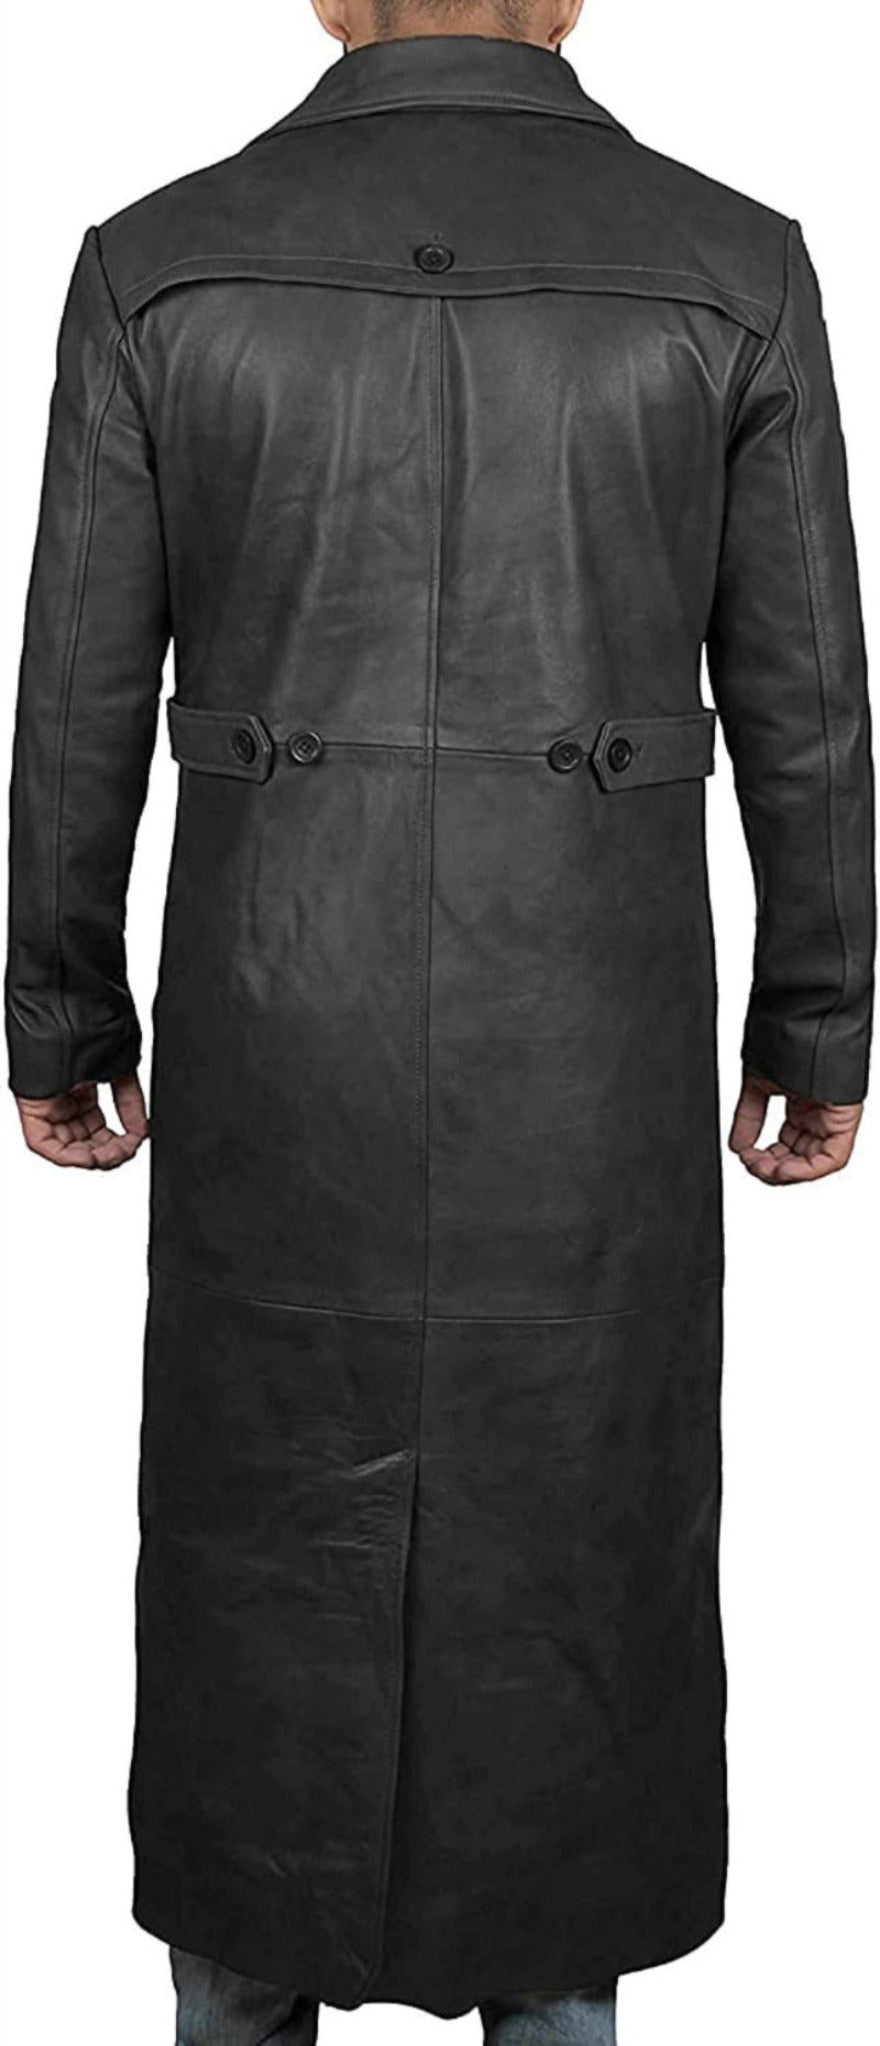 Picture of a model wearing our mens leather trench coat full length, Black color, back view.